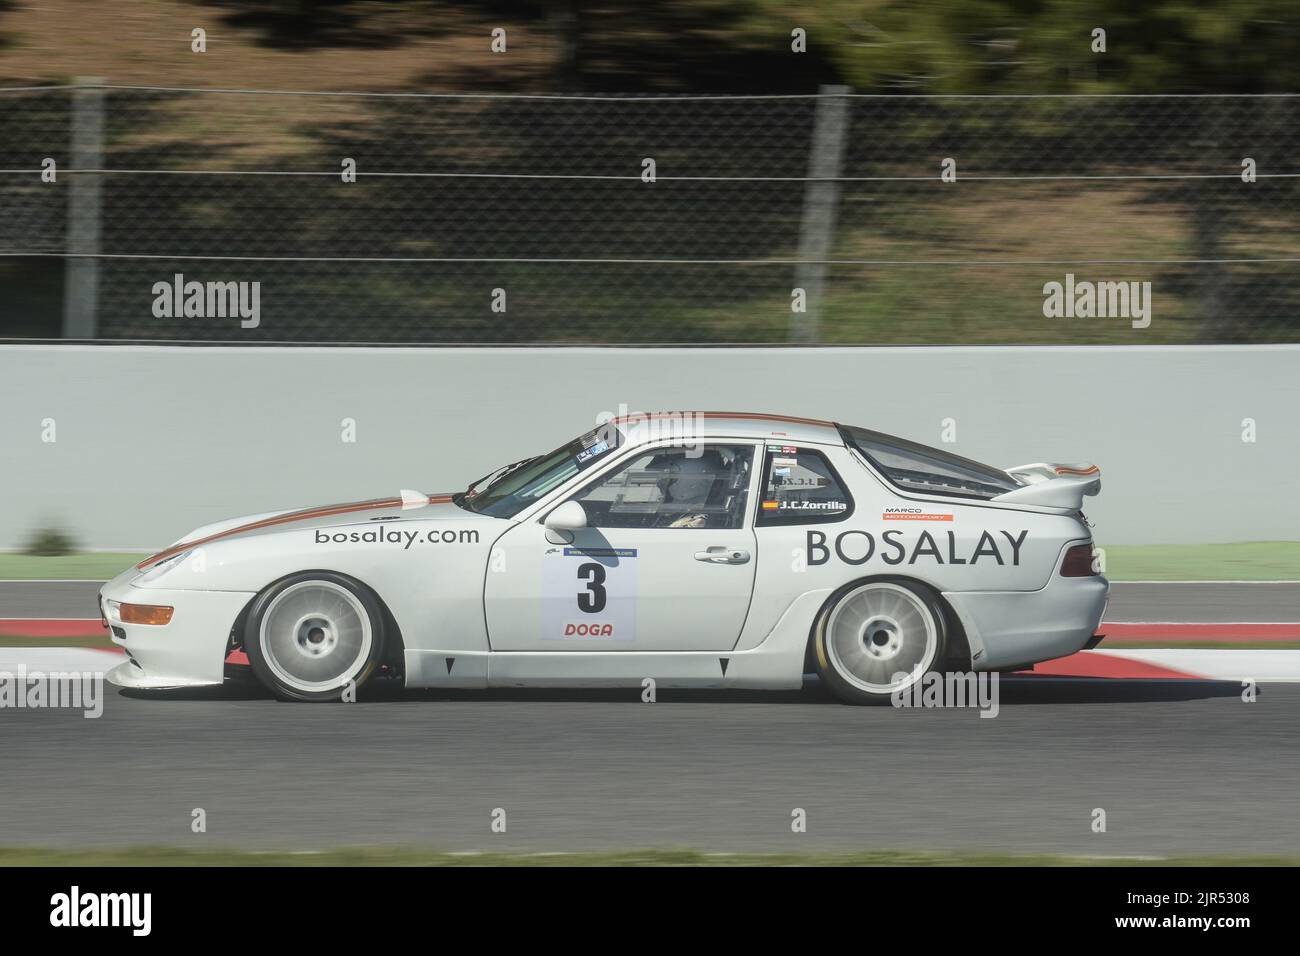 A white classic Porsche 911 car racing in a track in Barcelona, Spain Stock Photo